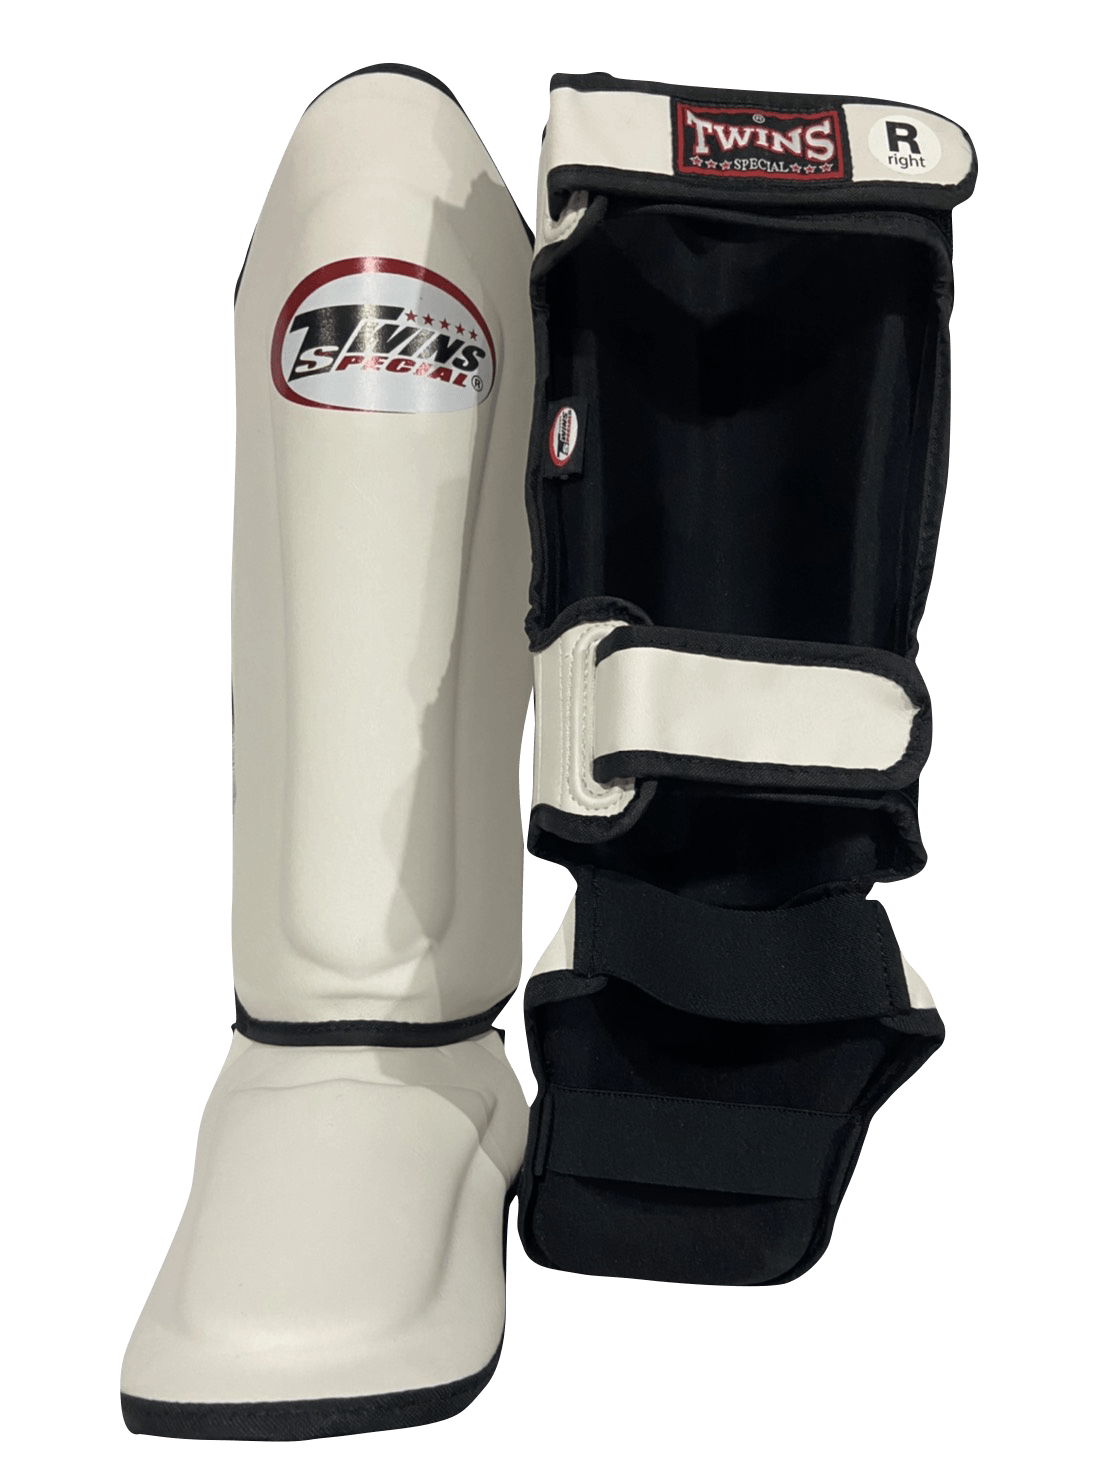 Twins Special Shinguards SGS10 White Twins Special